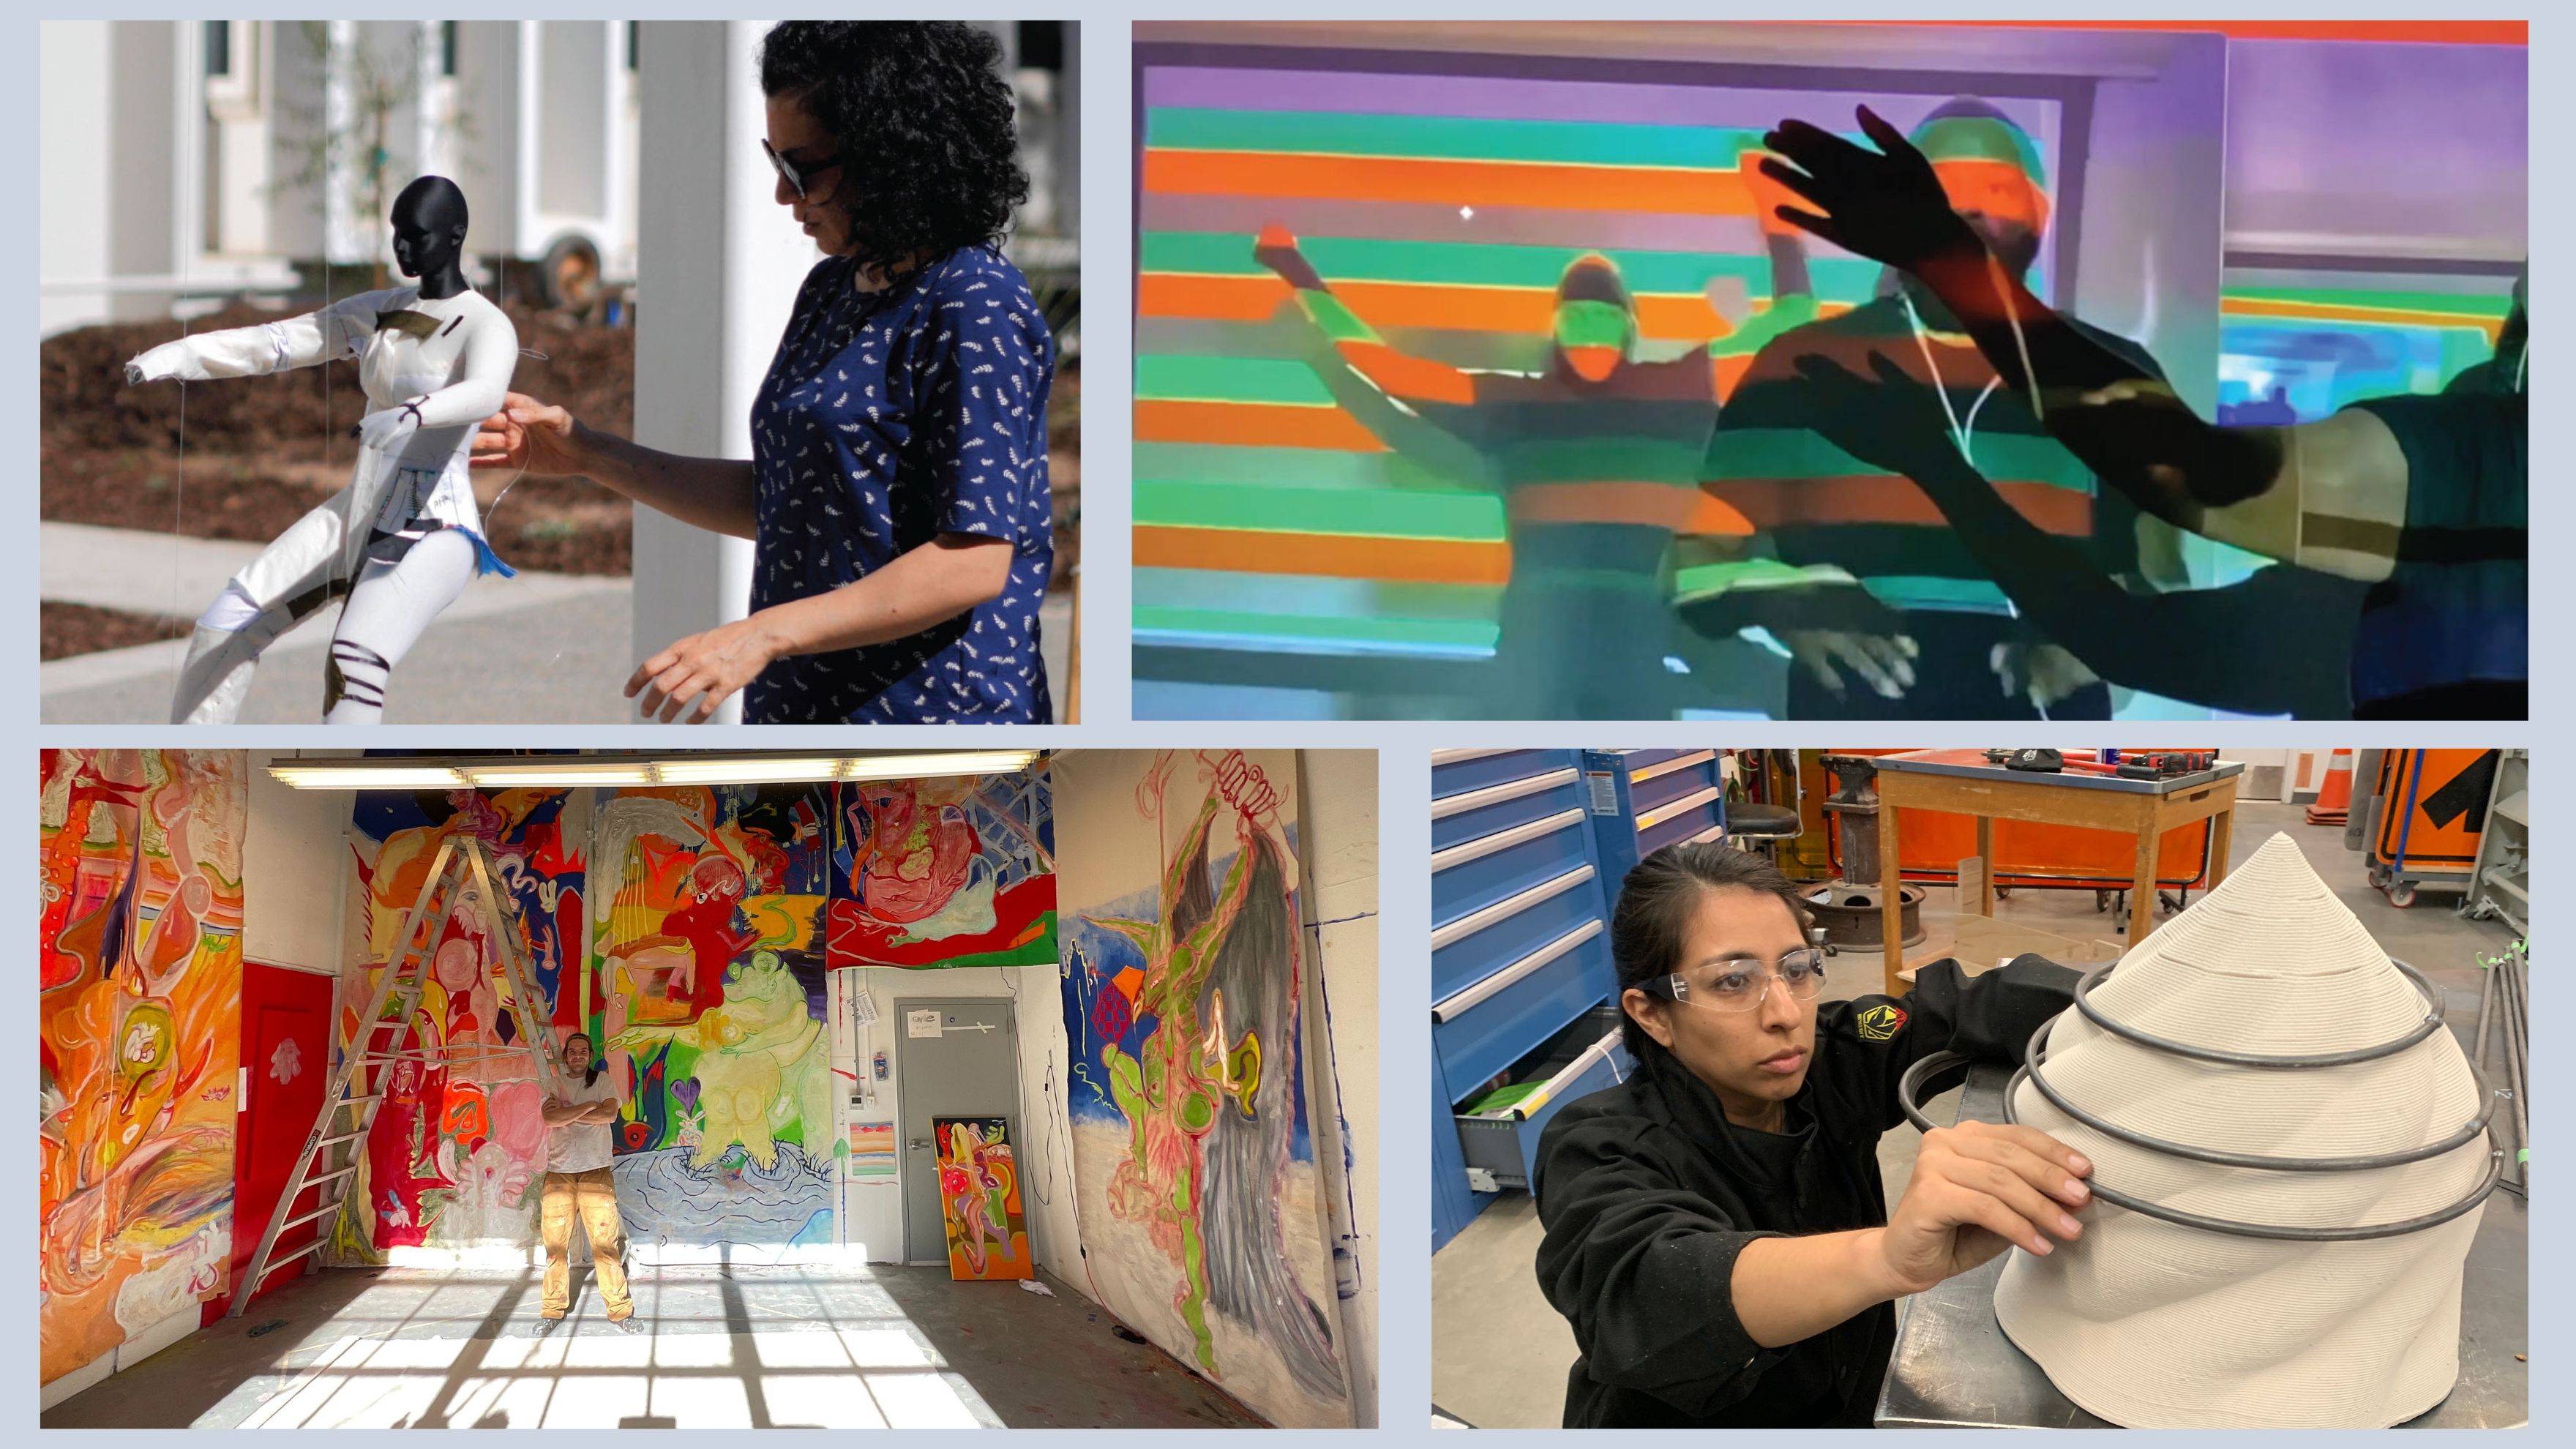 A montage of students showcasing their art: One student with a small mannequin in the top left corner, to the right of that is an artist standing in front of a colorful wall of stripes, in the bottom left a student stands in front of their murals, and in the bottom left corner, a student works on crafting her artworks which is shaped like a cone